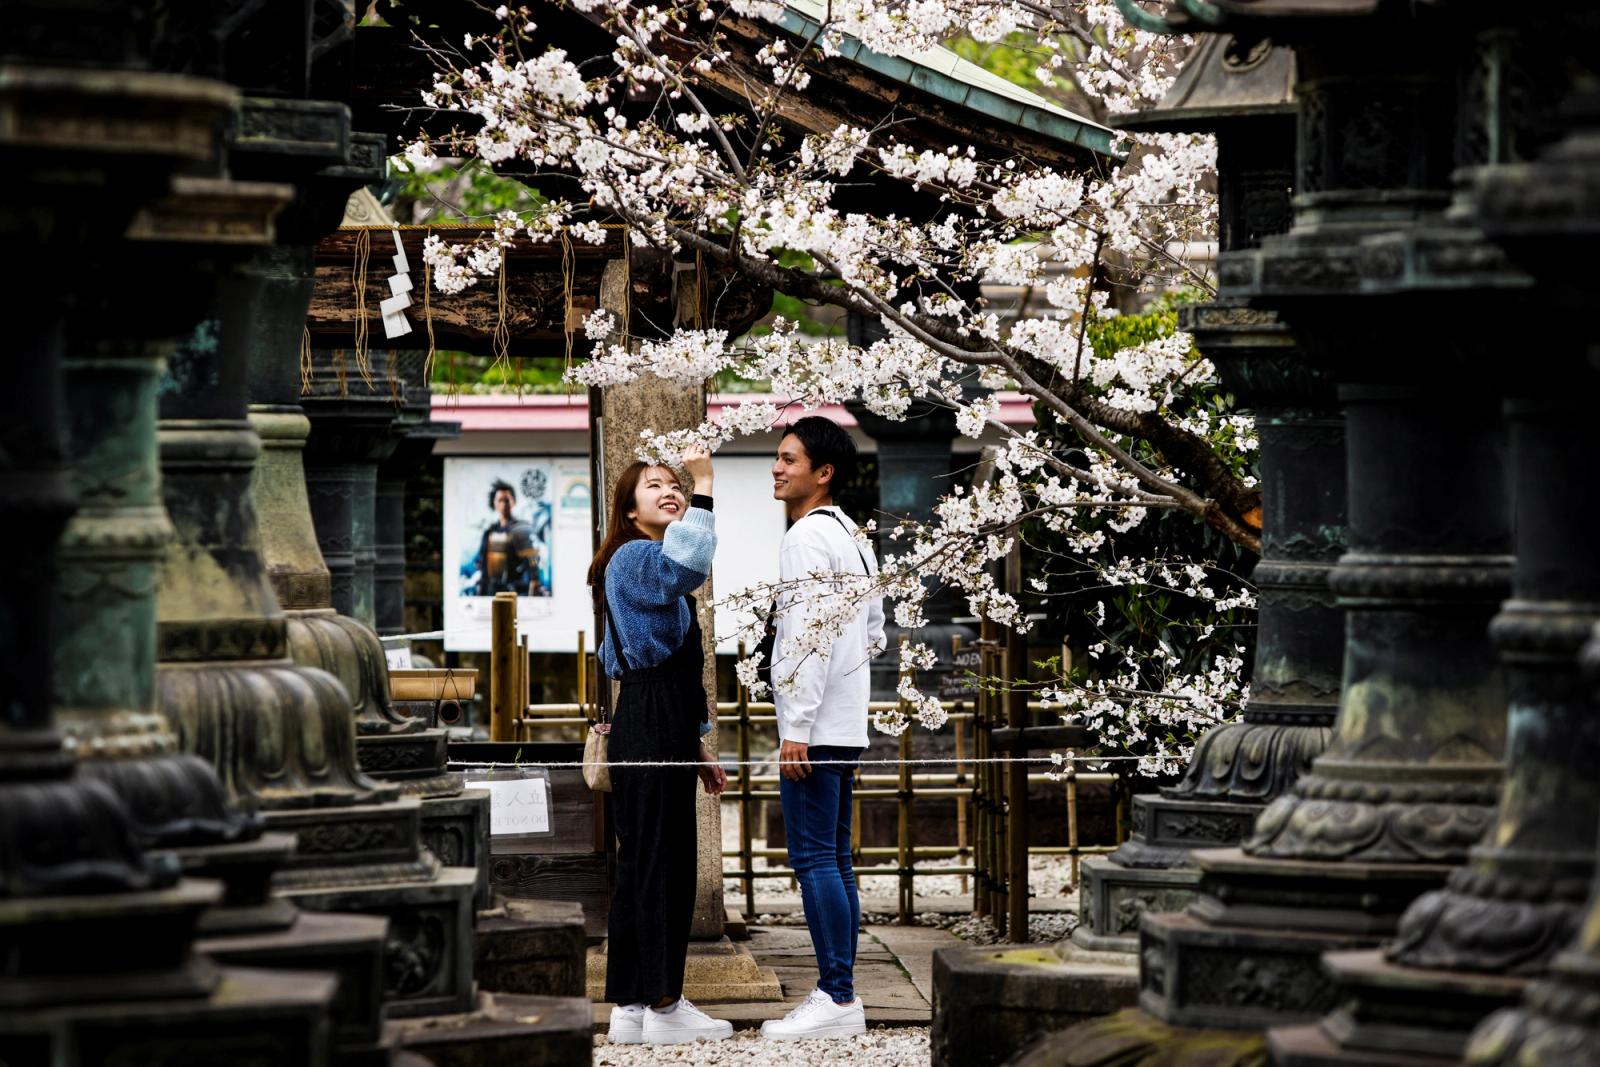 Young couple observe the cherry blossoms at Ueno park in Tokyo, Japan, March 21, 2023. REUTERS/Androniki Christodoulou